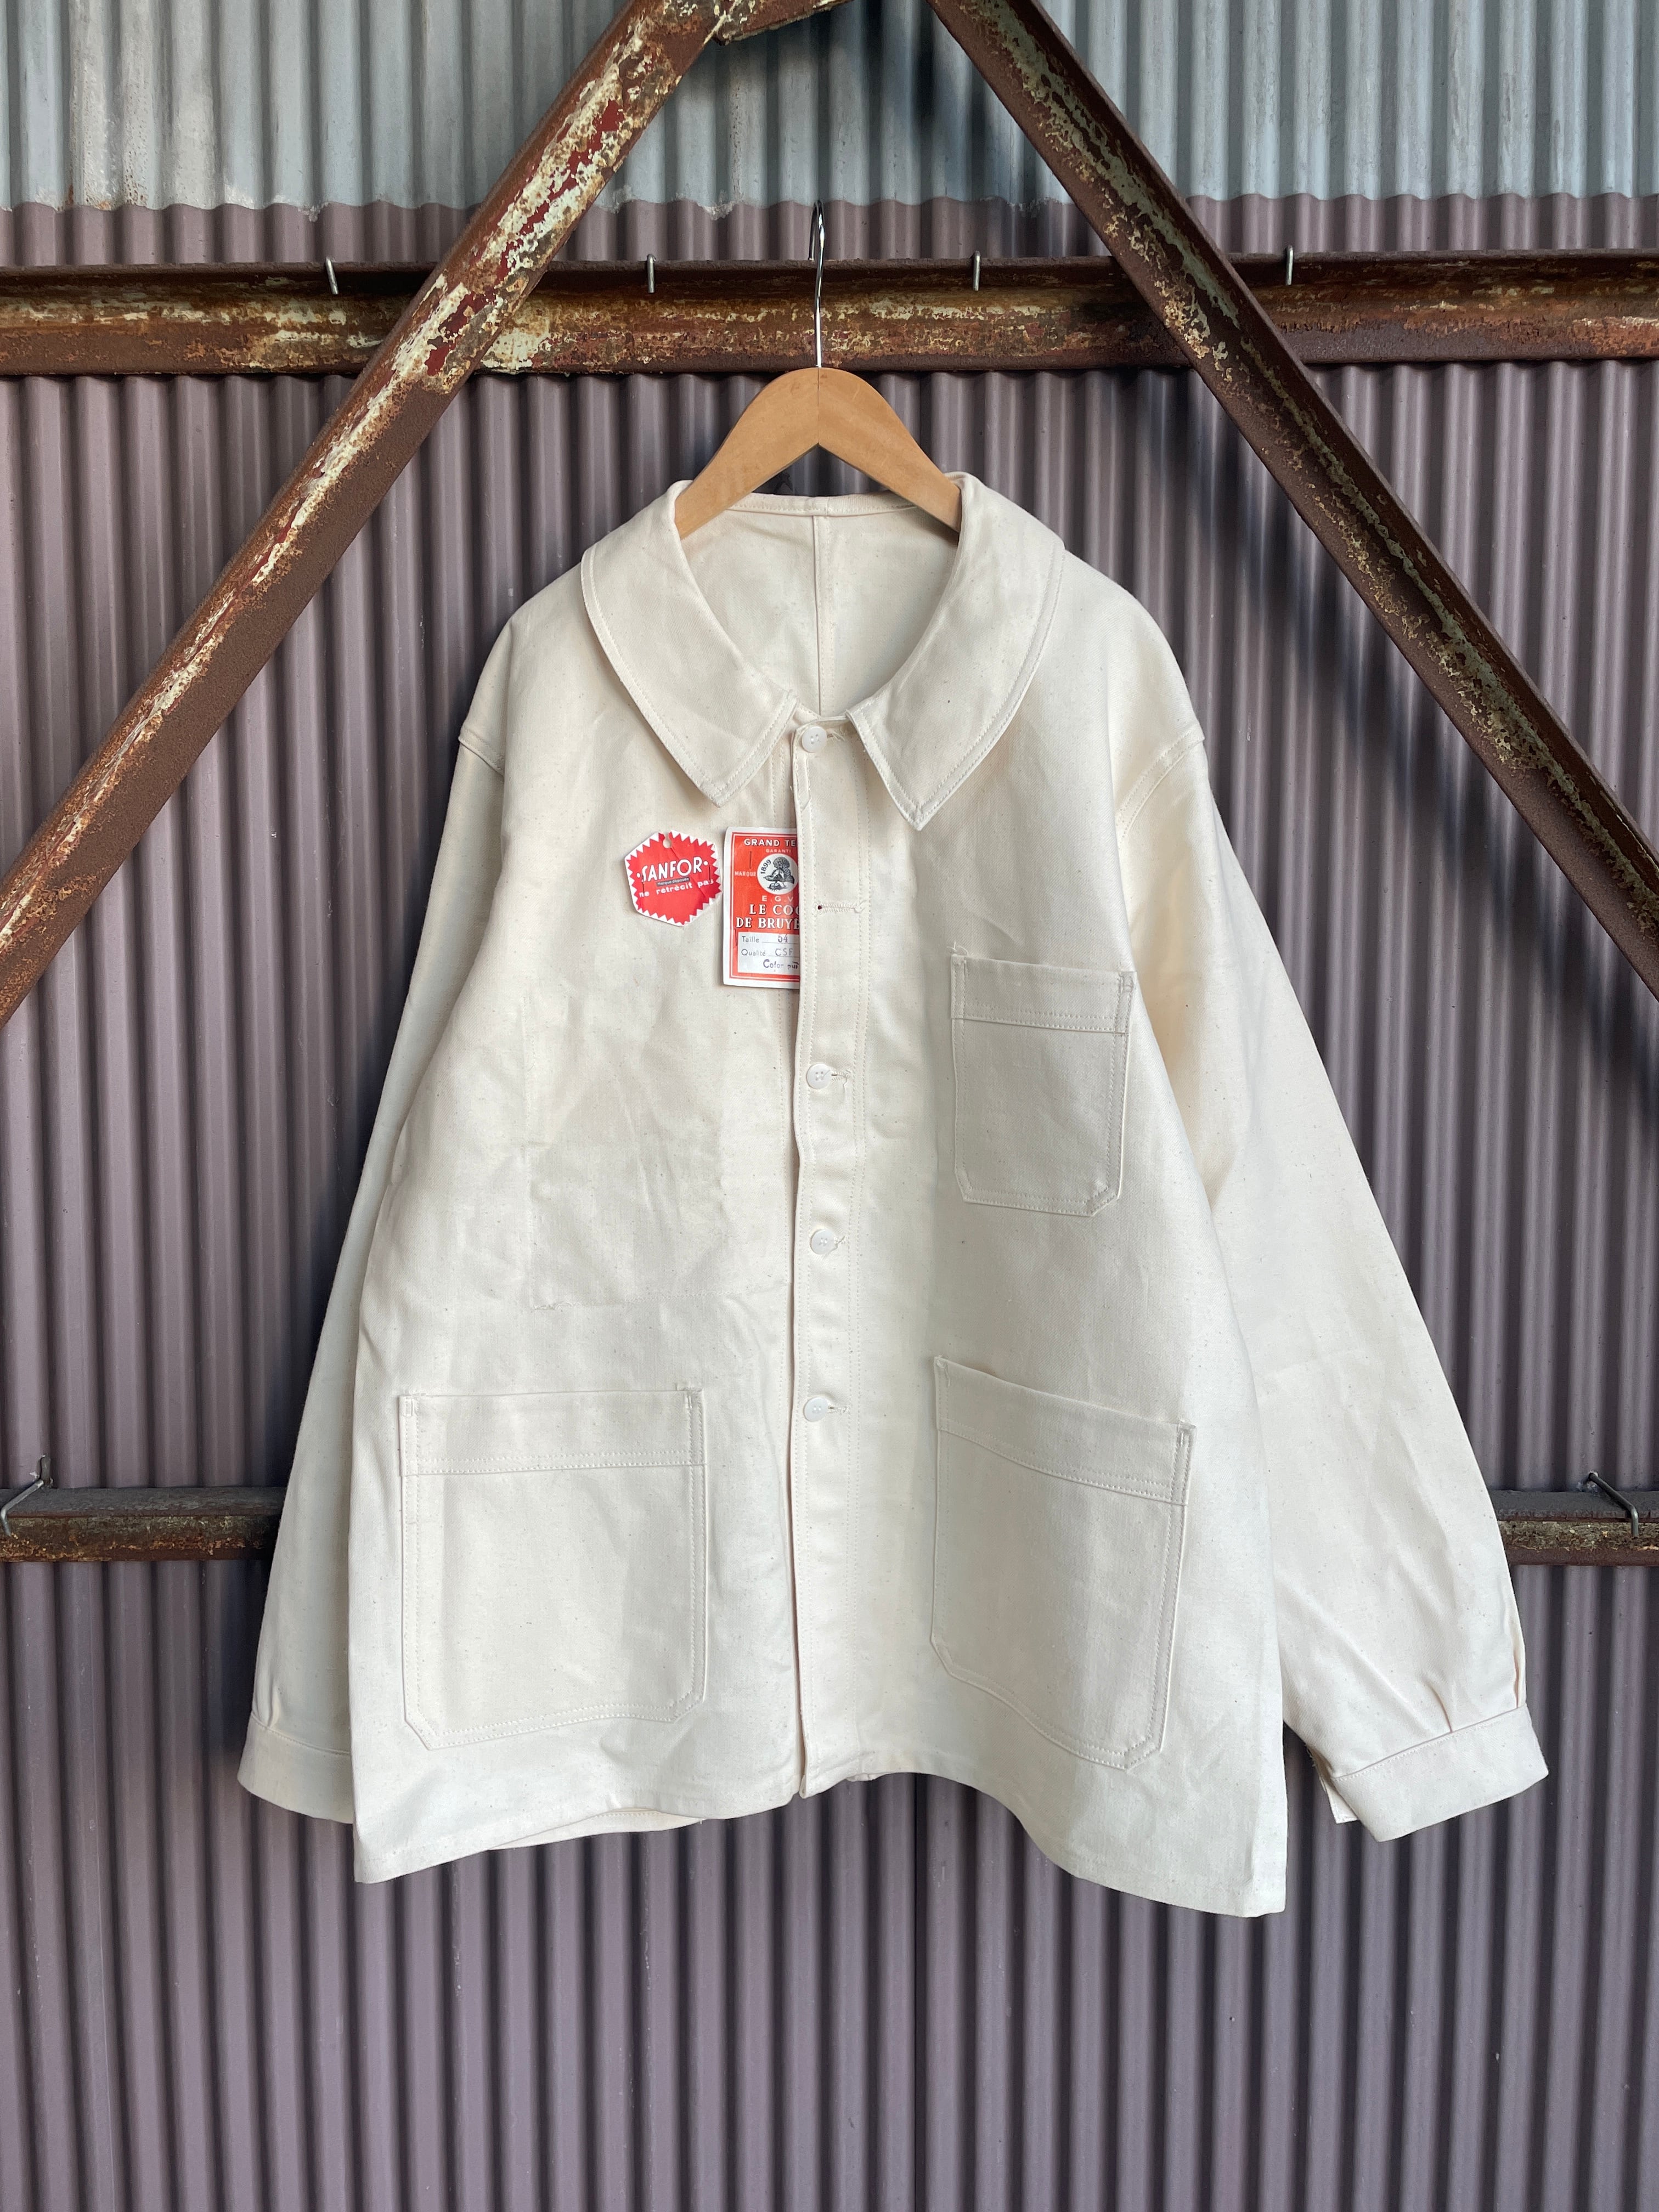 aoihitsuji / mid 20th c. french / cotton work jacket / dead stock ...